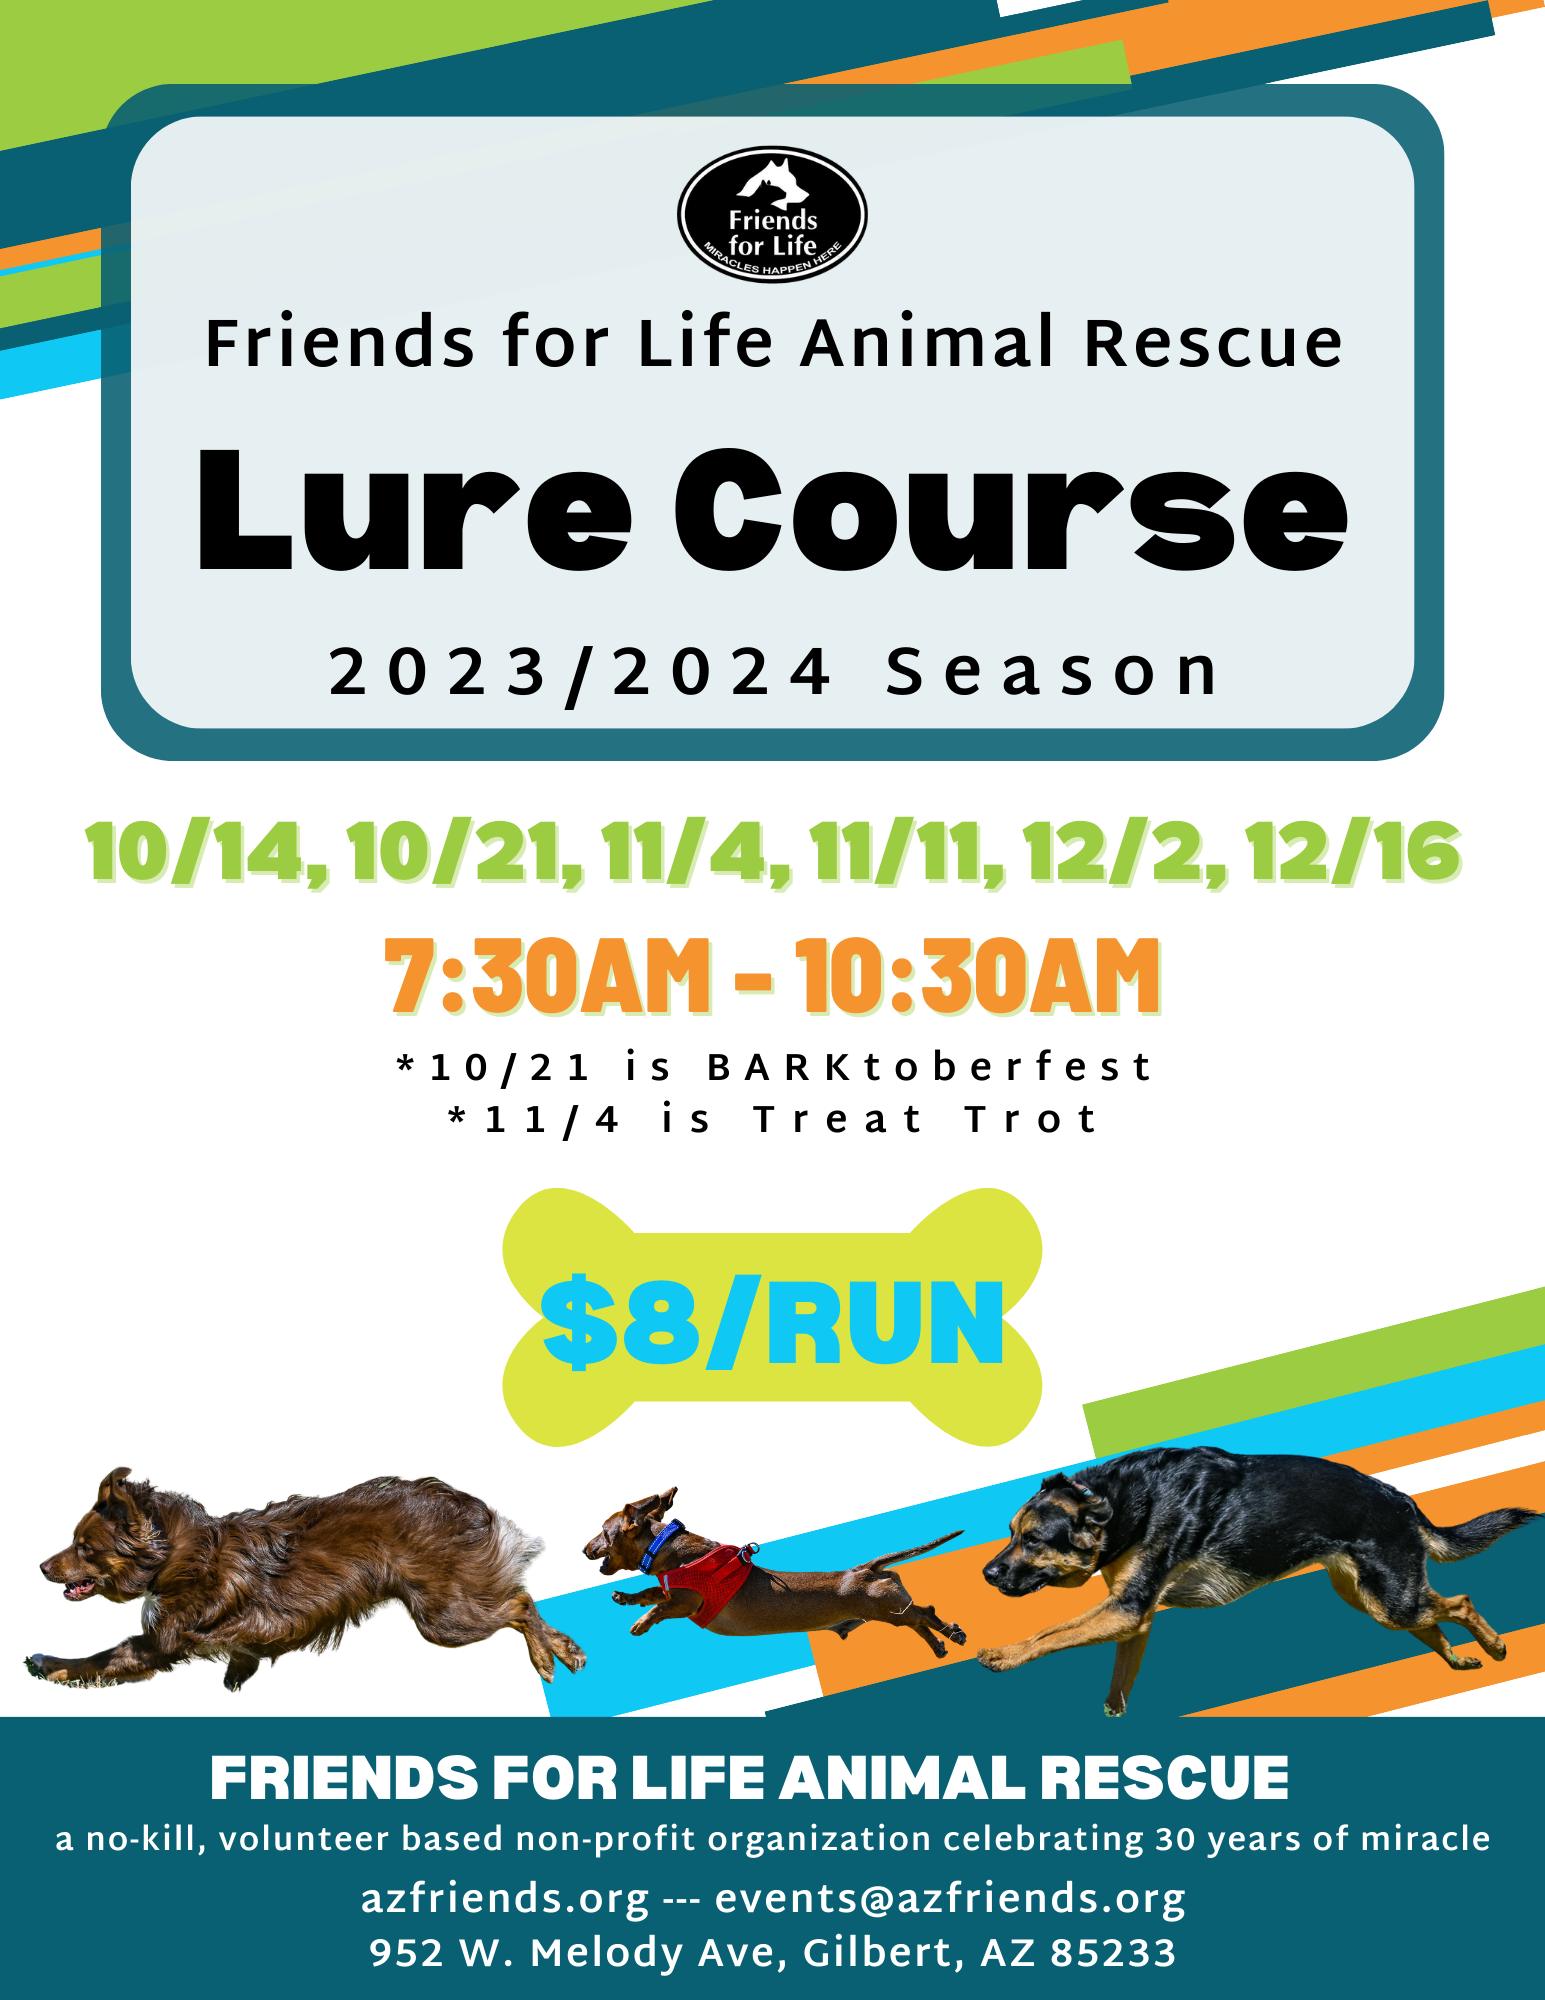 Lure Course » Friends for Life Animal Rescue